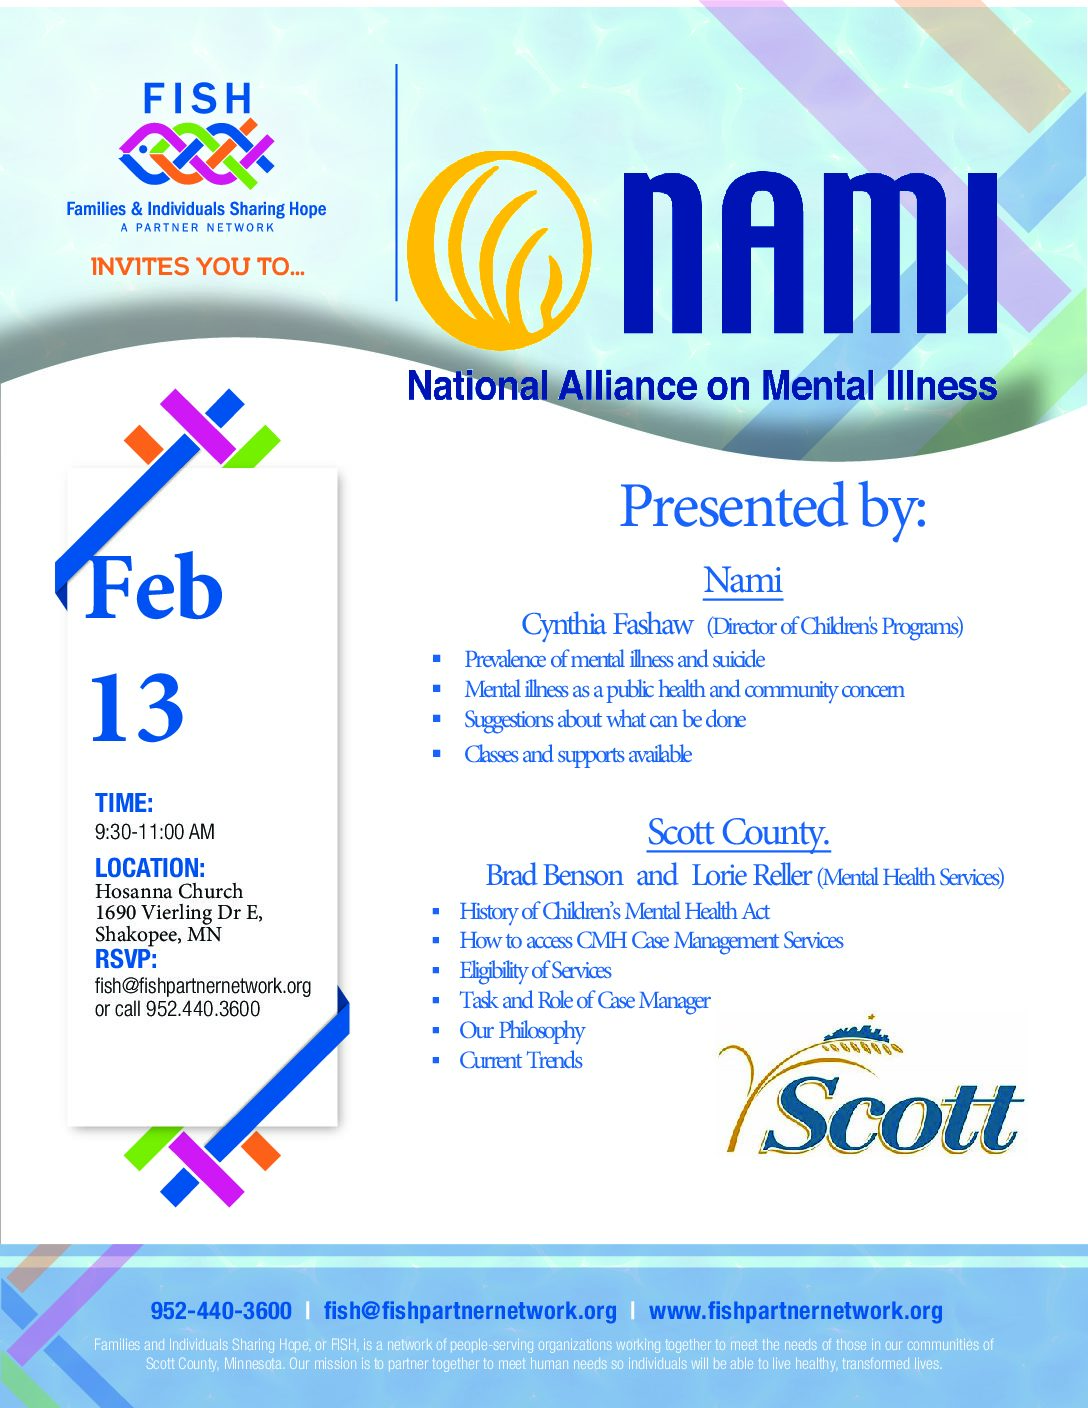 Feb 13 2nd Thursday Meeting – NAMI / Mental Health Services in Scott County